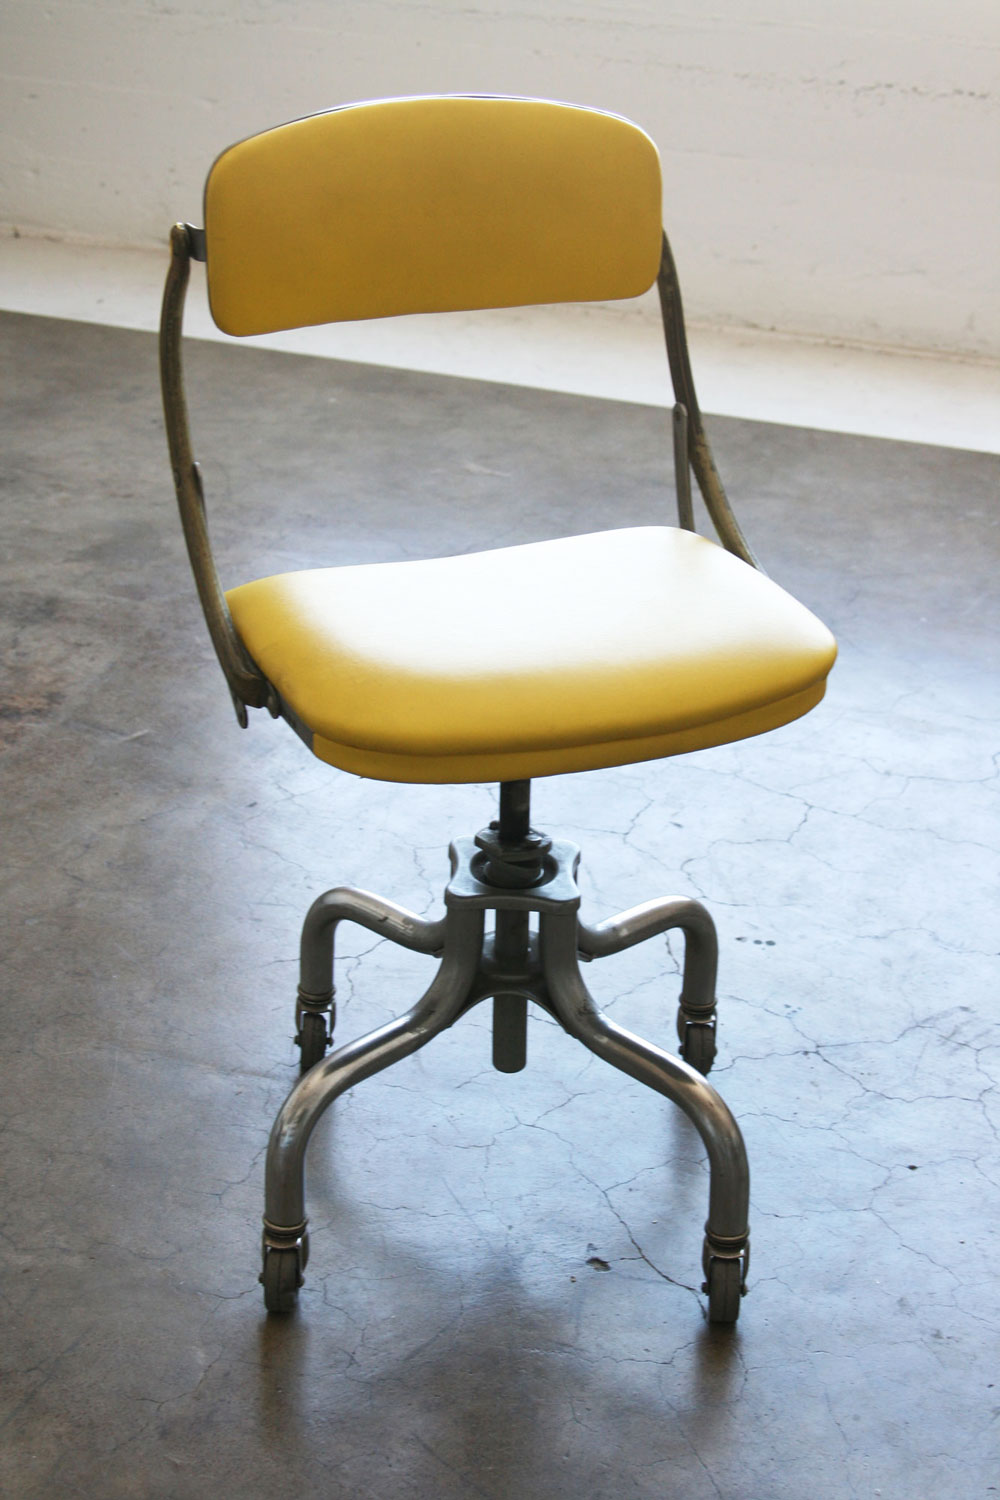 domore-chair_5243